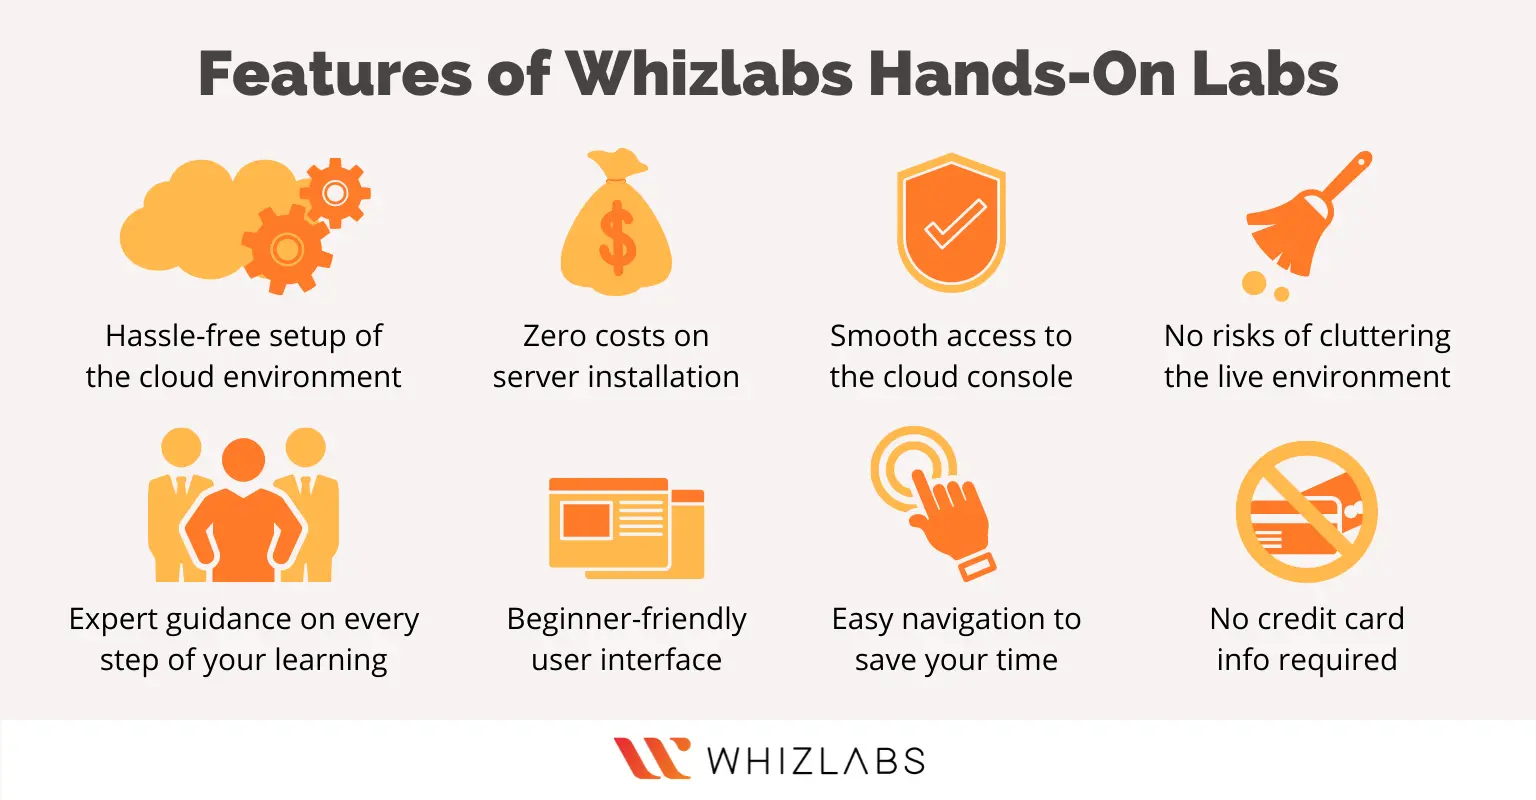 whizlabs hands-on labs benefits